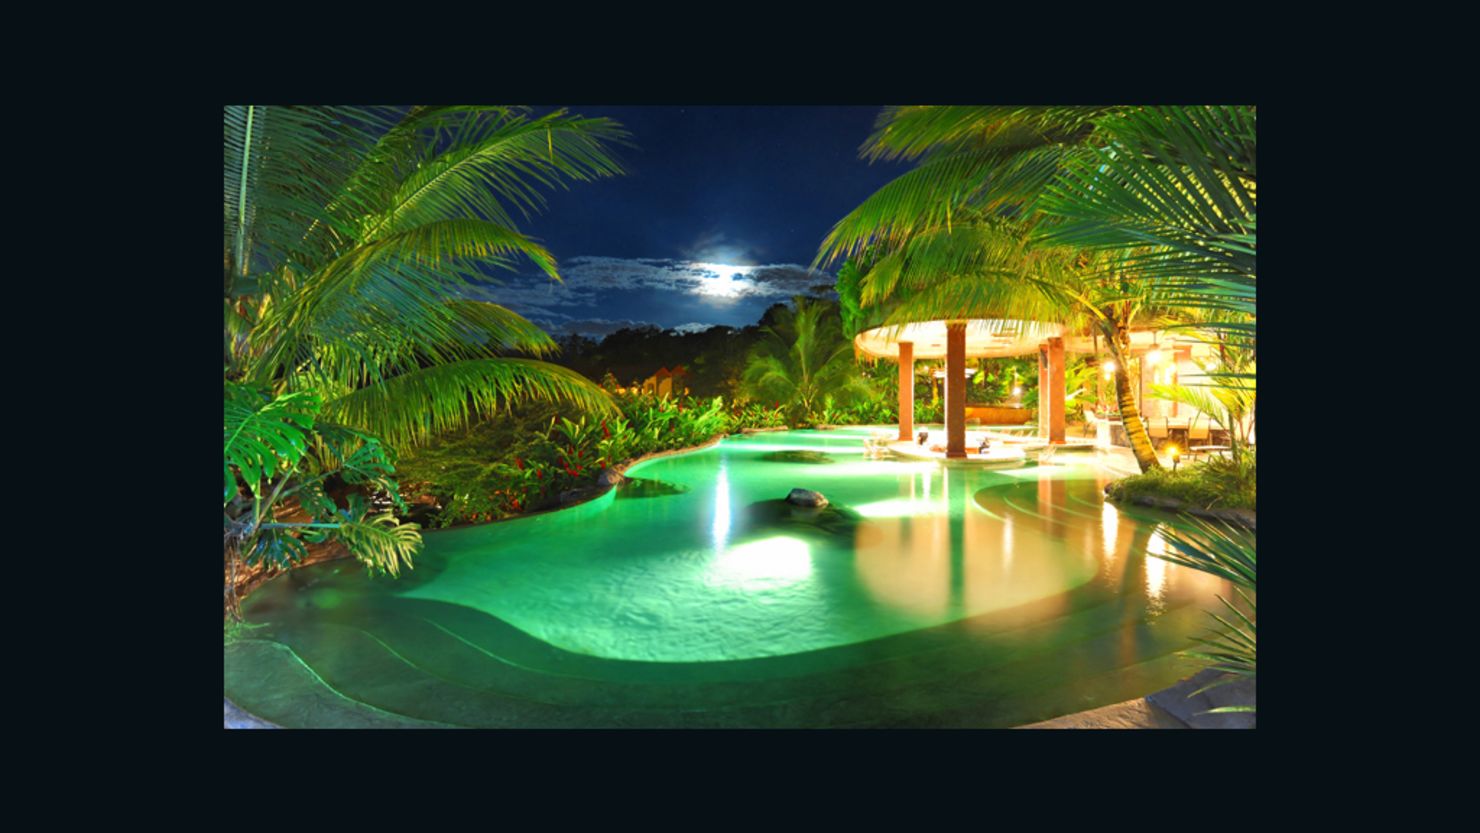 The Springs Resort & Spa was the host hotel for ABC's "The Bachelor" in Costa Rica.